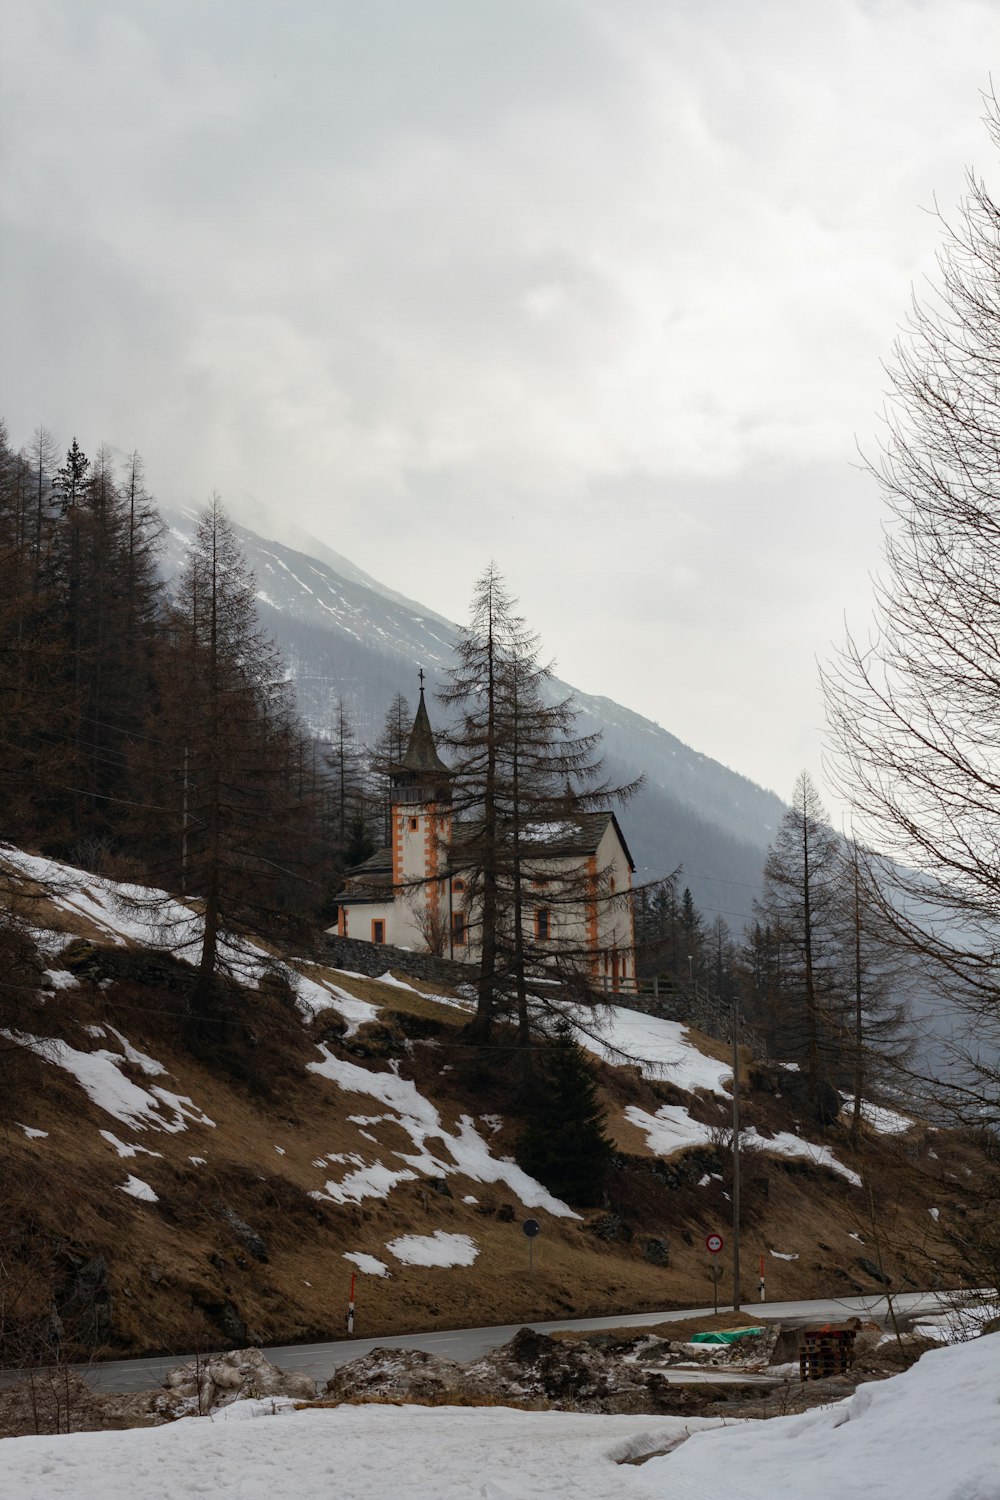 a house on a hill with snow on the ground